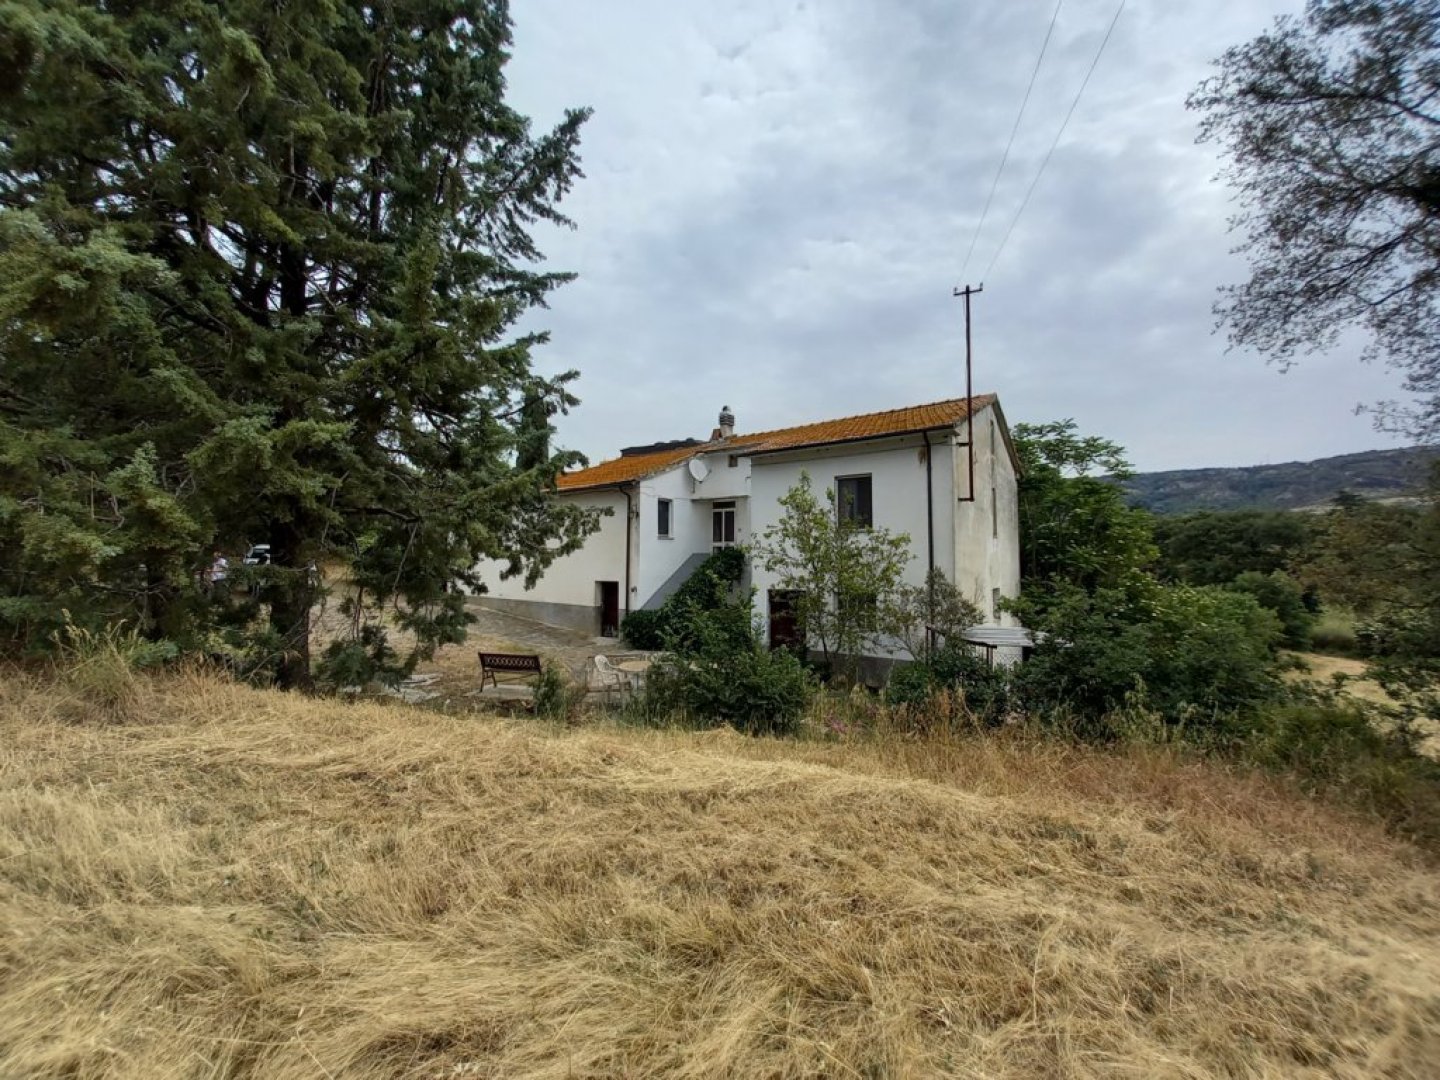 Detached house in the open countrysideg_20220617081652 ium36909-g_20220617081652.